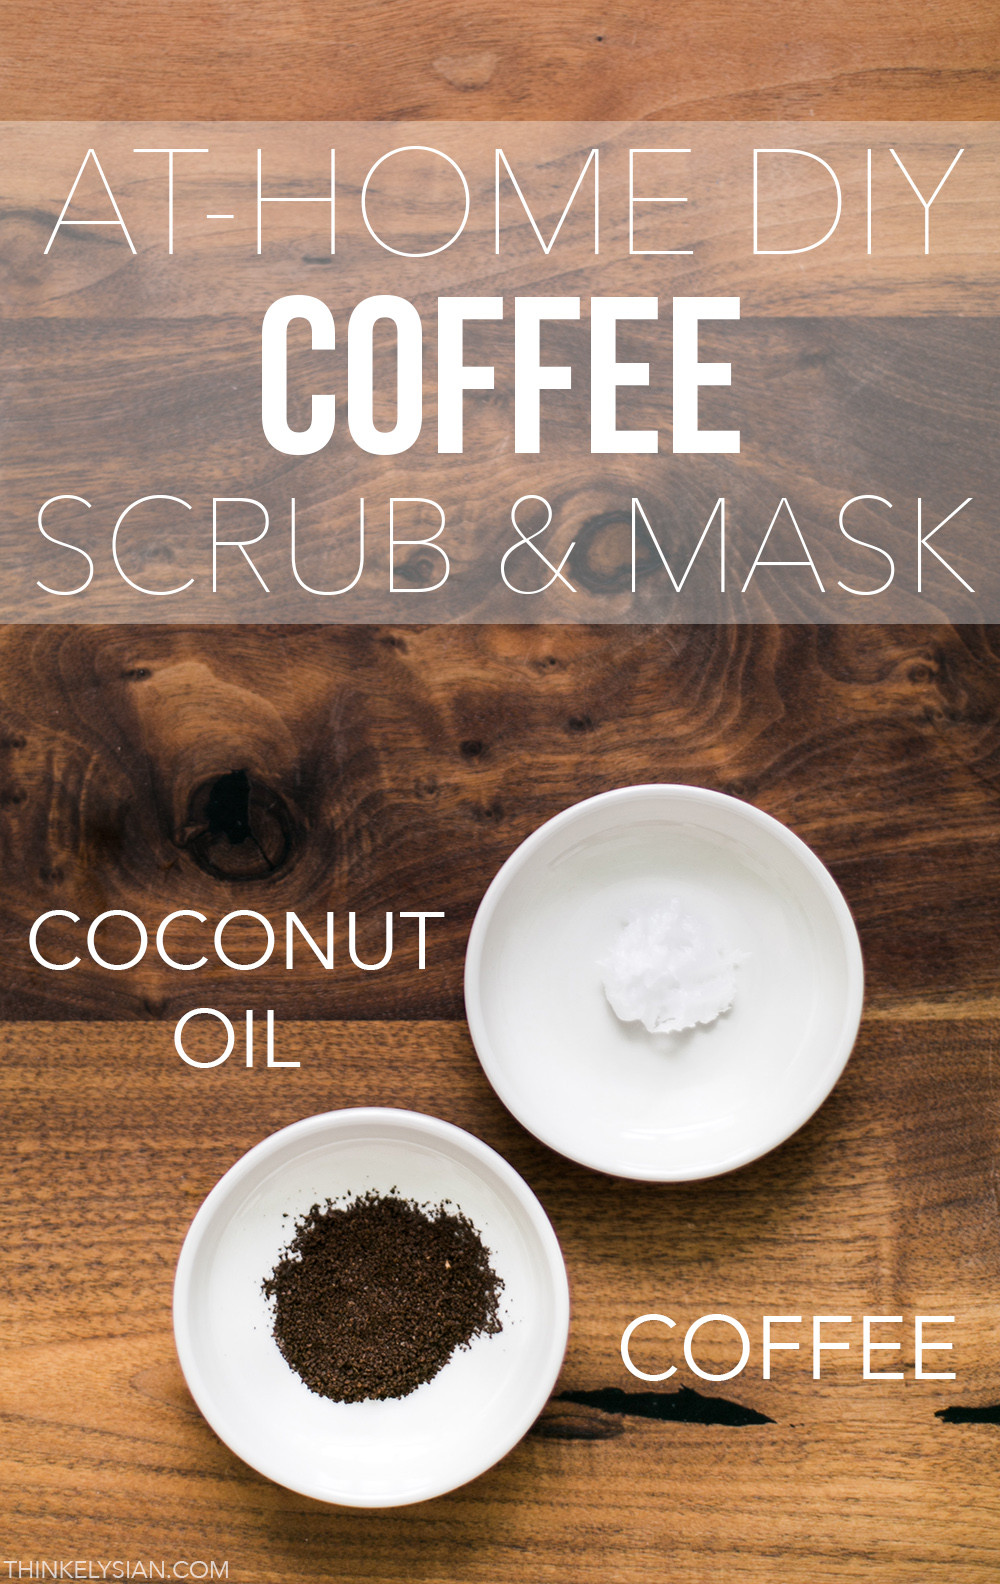 Best ideas about DIY Coffee Scrub For Face
. Save or Pin Think Elysian At Home DIY Coffee Scrub & Mask Think Now.